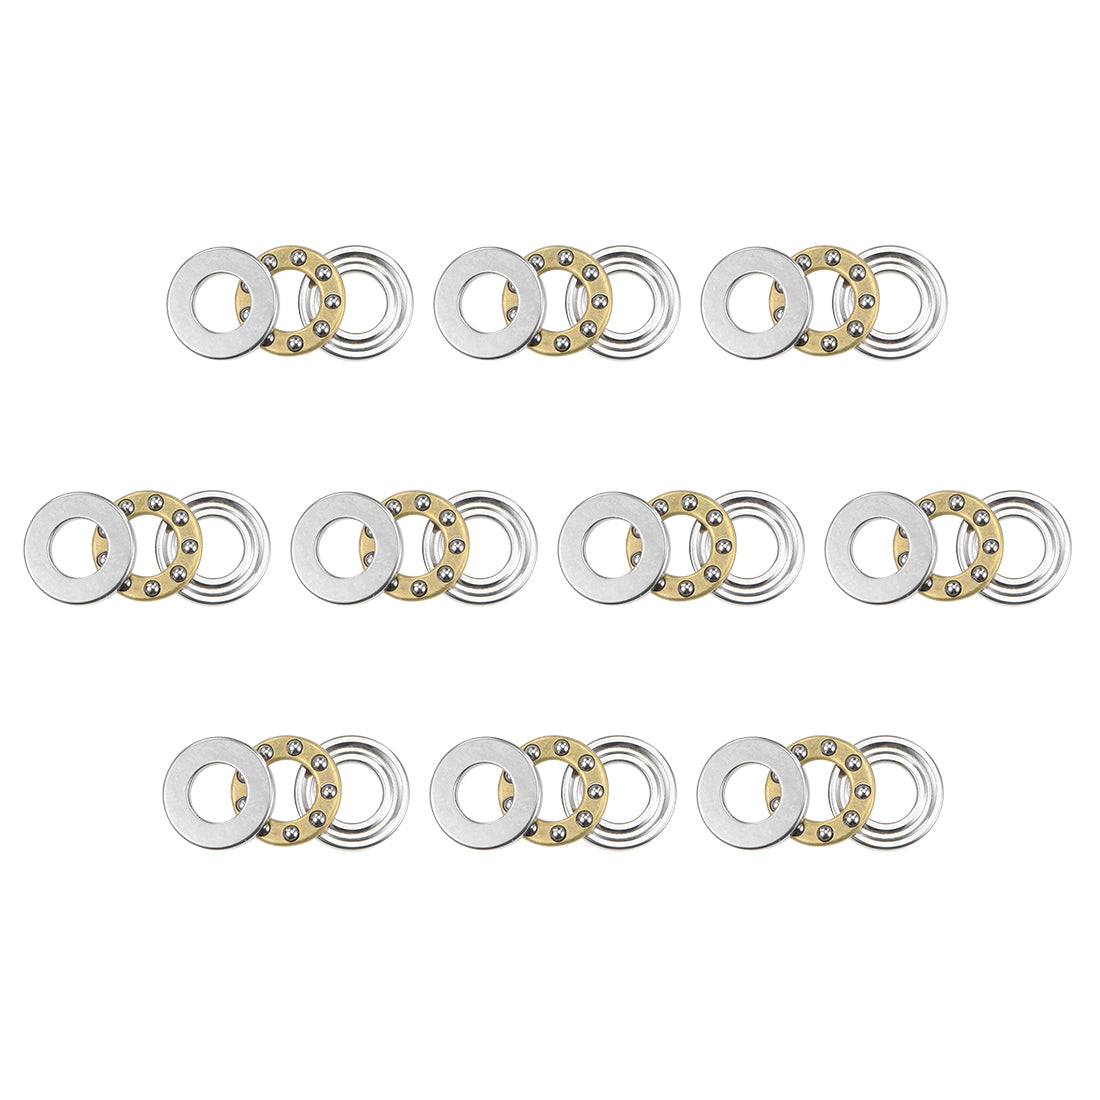 uxcell Uxcell F5-10M Miniature Thrust Ball Bearing 5x10x4mm Chrome Steel with Washer 10Pcs